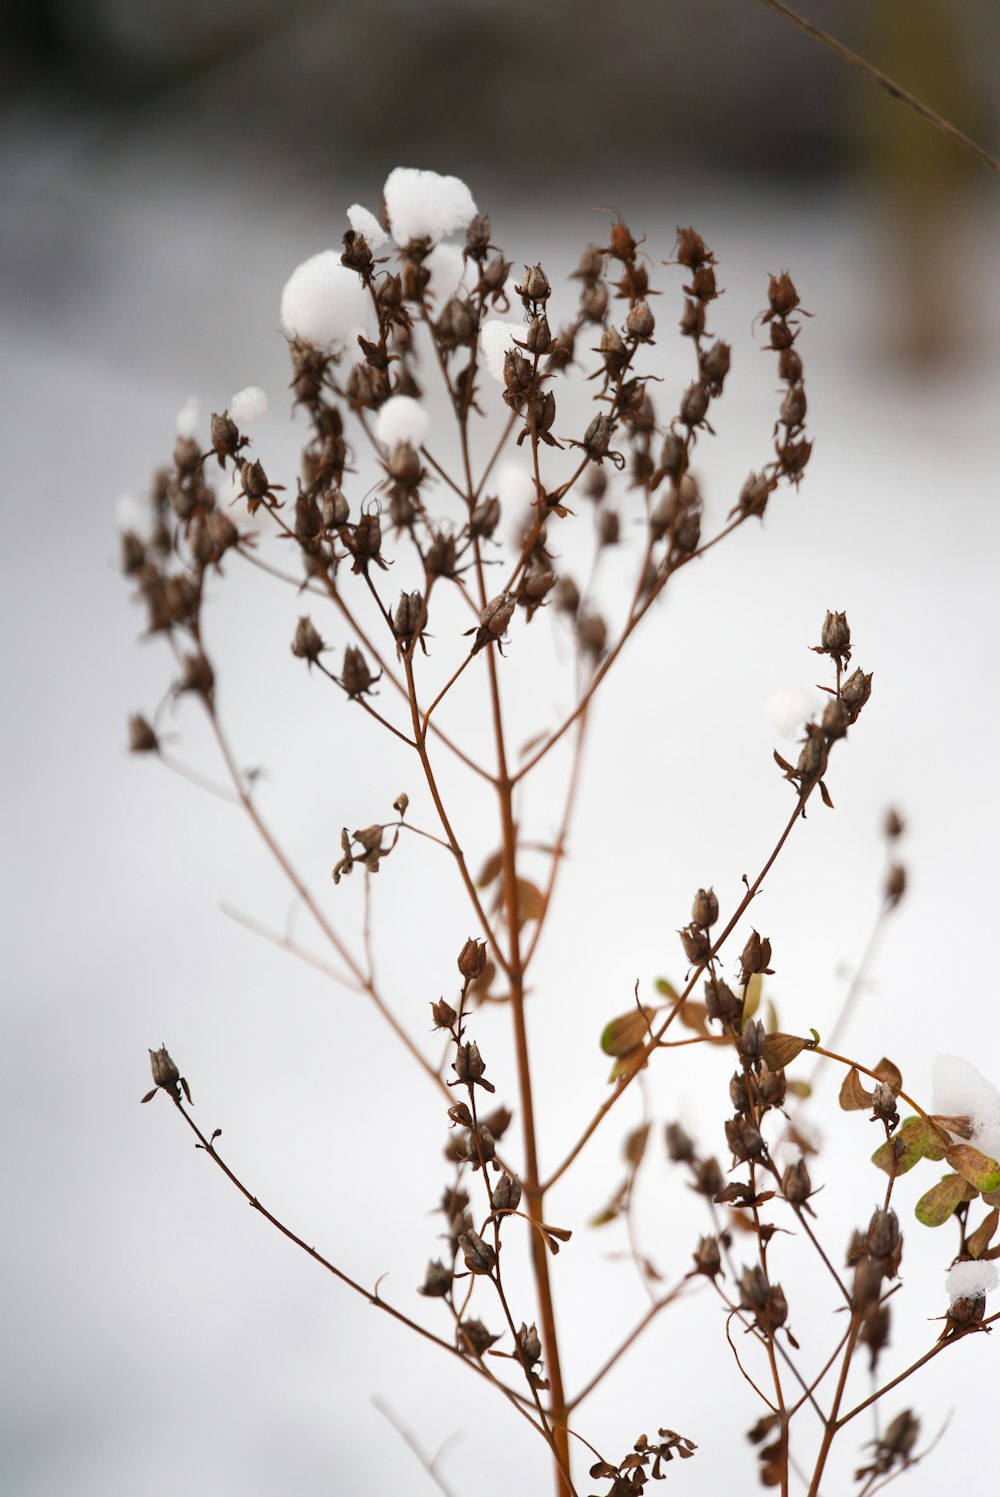 a close up of a plant with snow on it